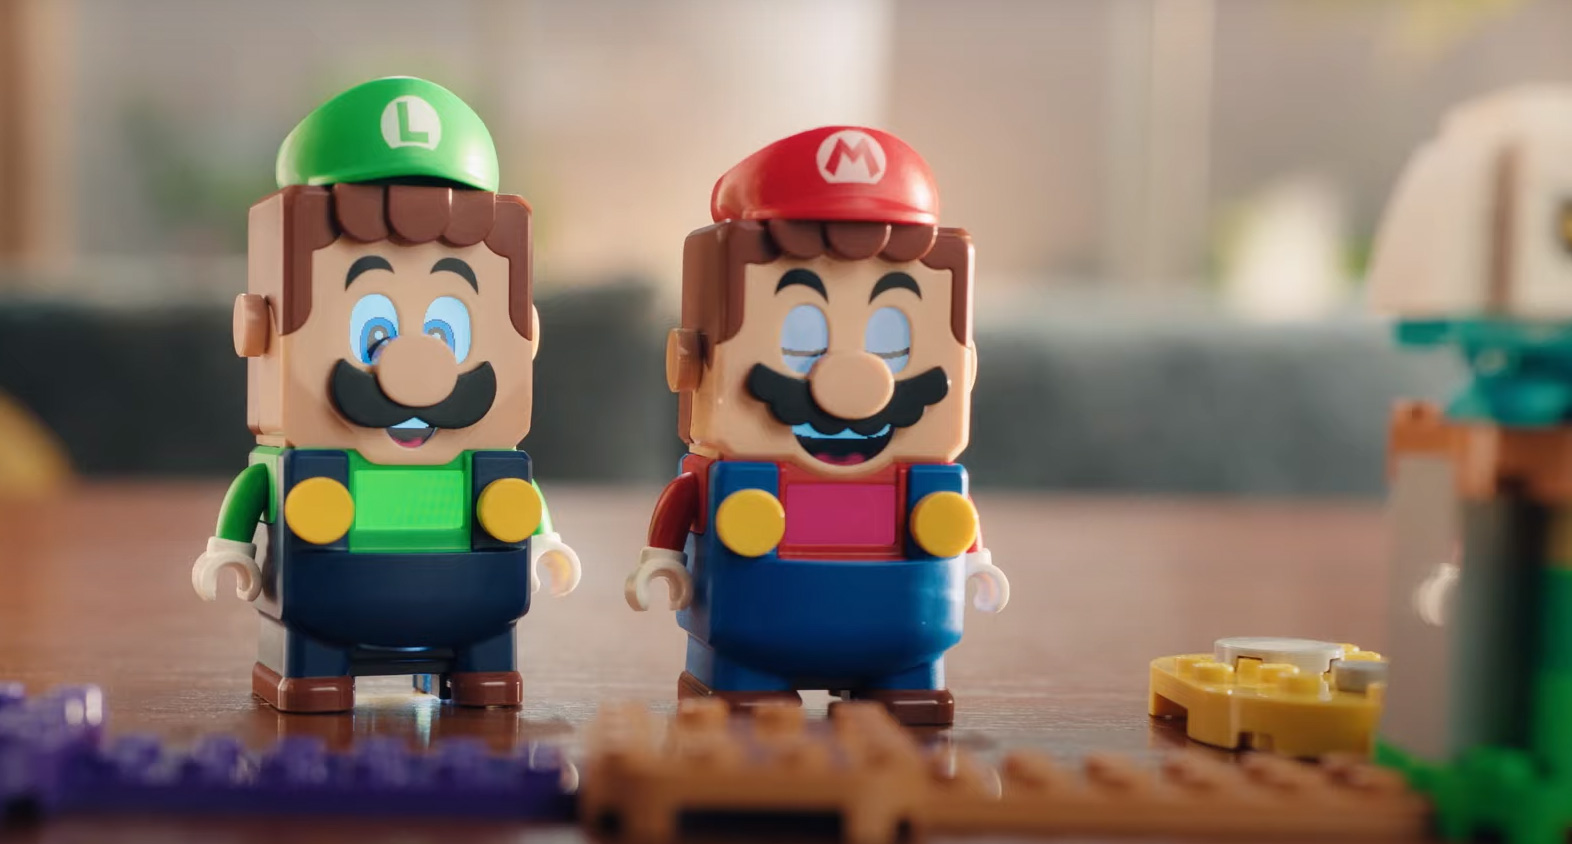 The Lego Luigi toy interacts with Lego Mario in a two-player mode | VGC